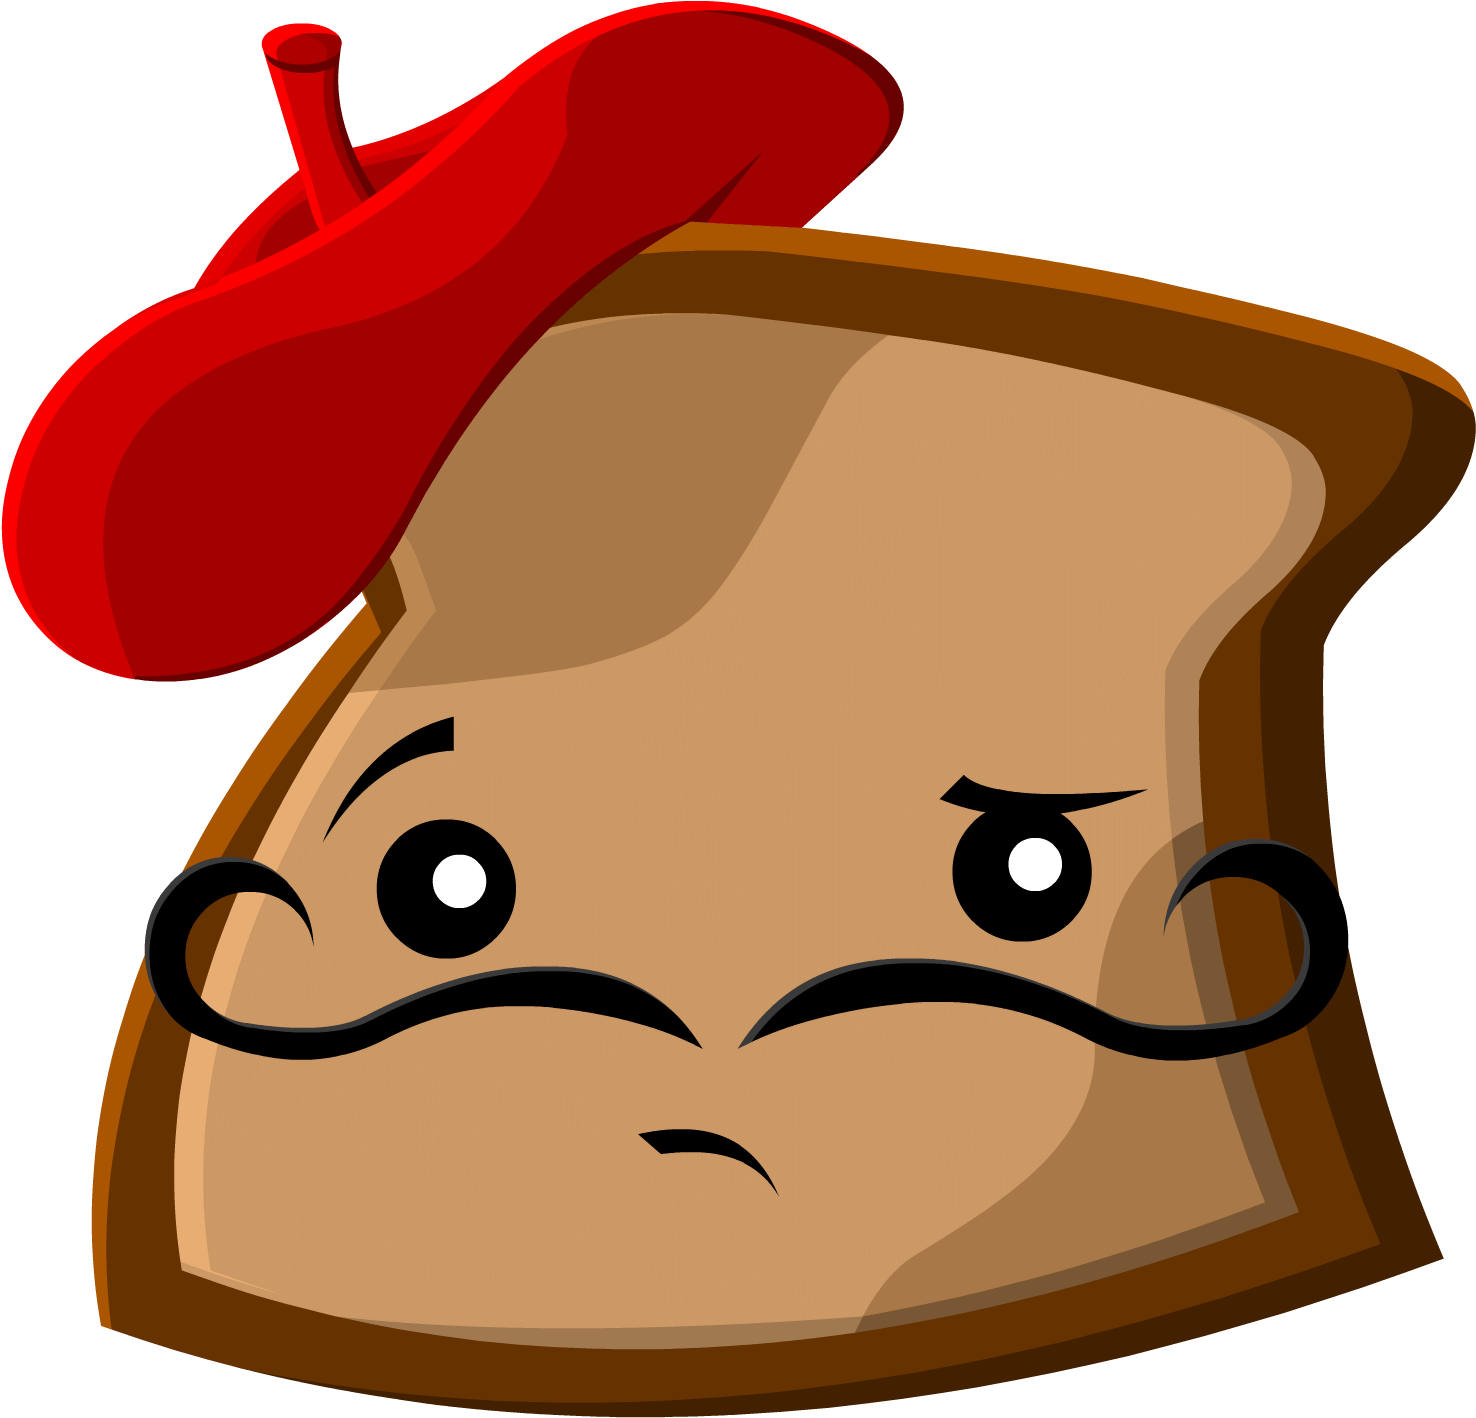 A Cartoon Of A Slice Of Bread With A Mustache And A Red Hat